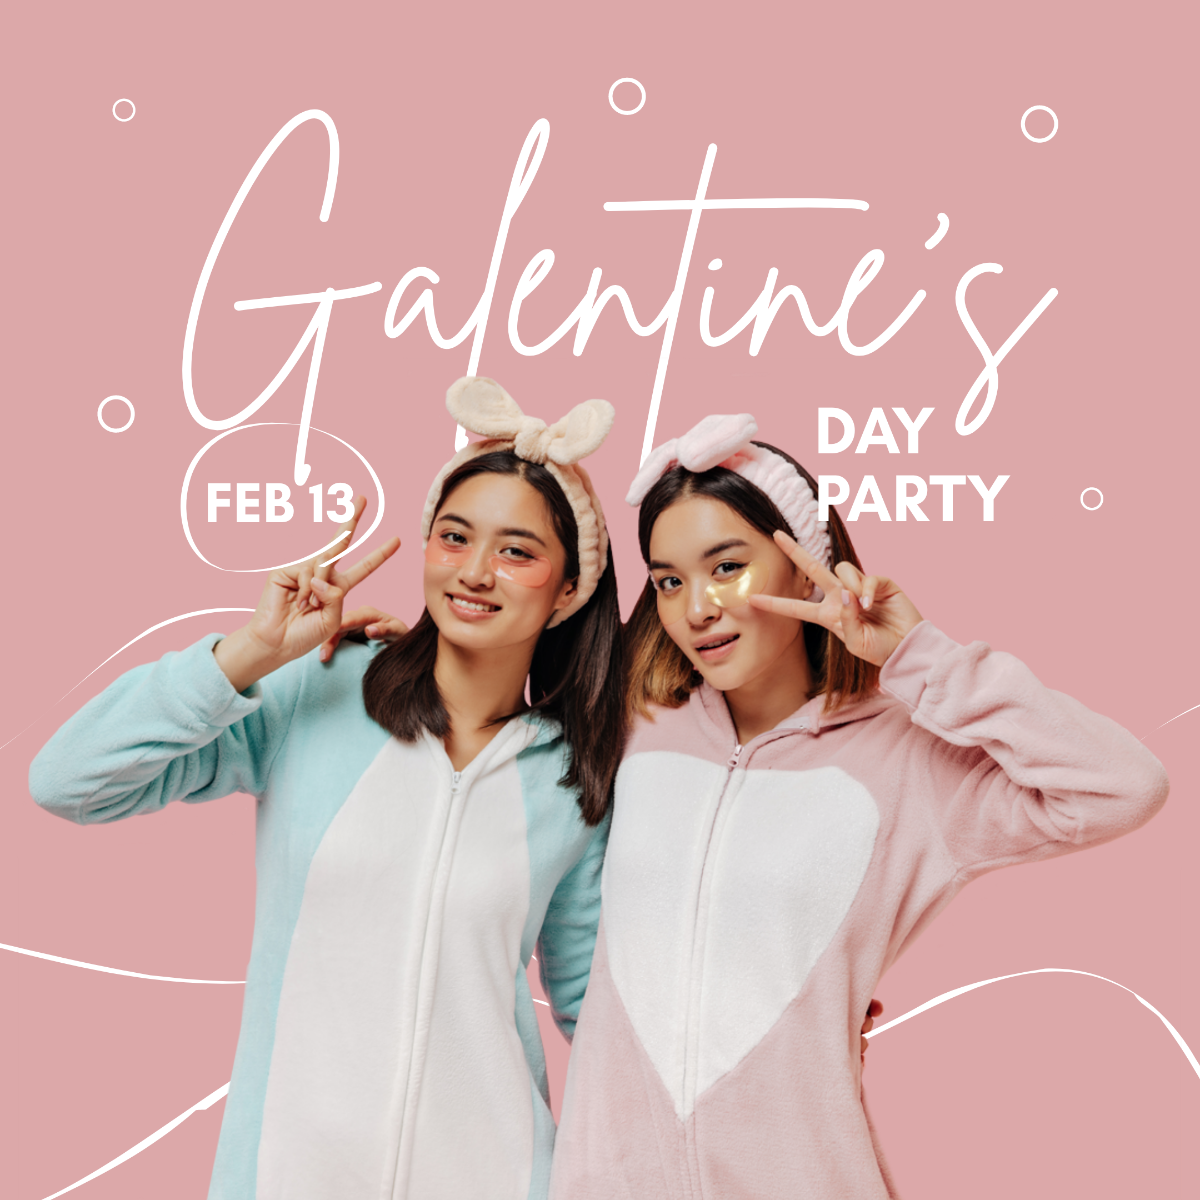 Galentines Day Party Instagram Post Template